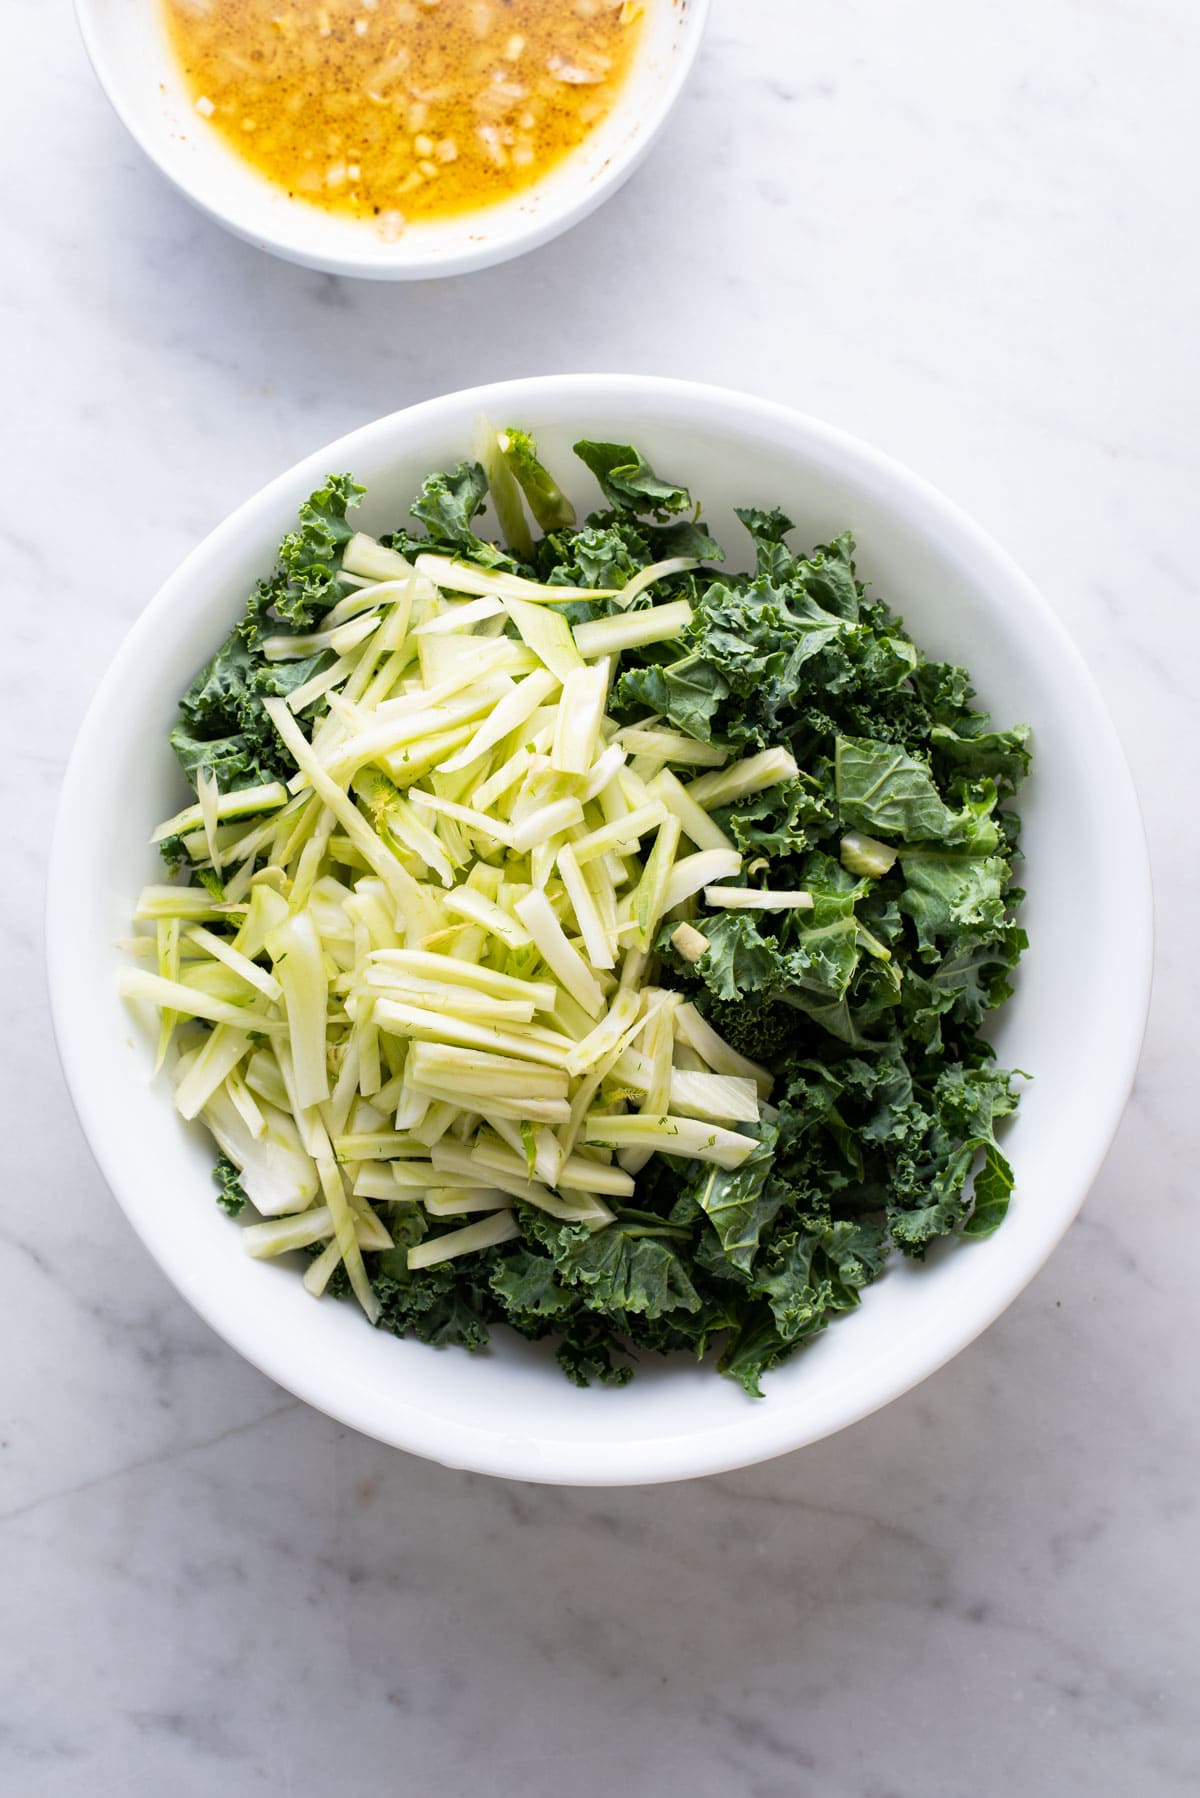 Chopped kale and fennel in a white bowl.